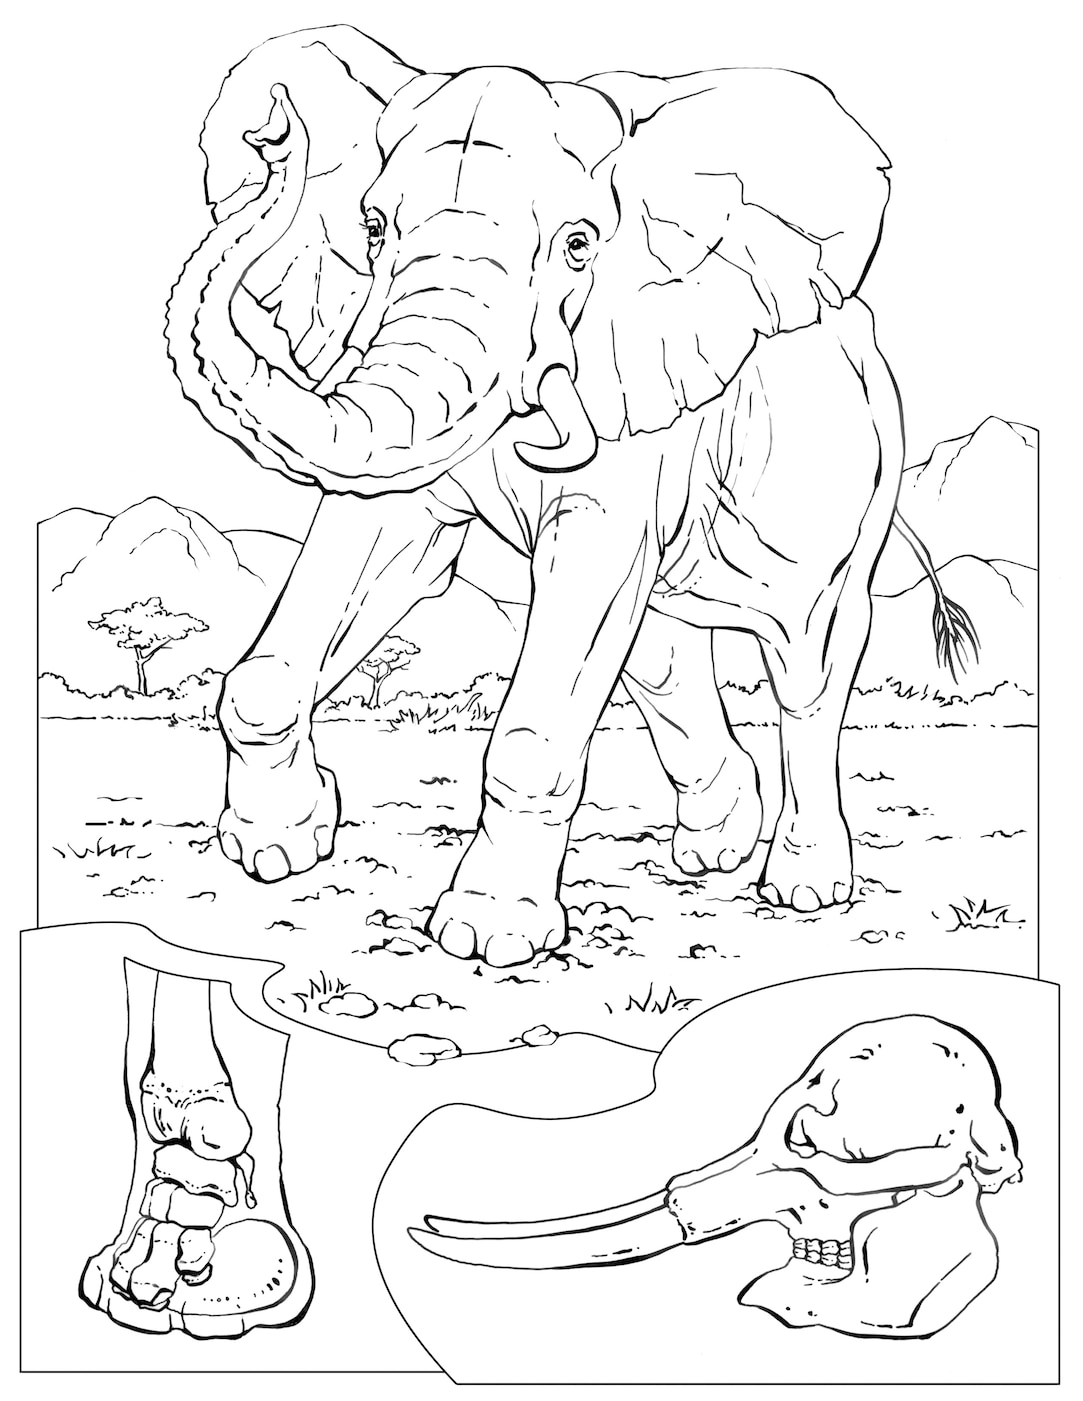 Coloring book animals a to i